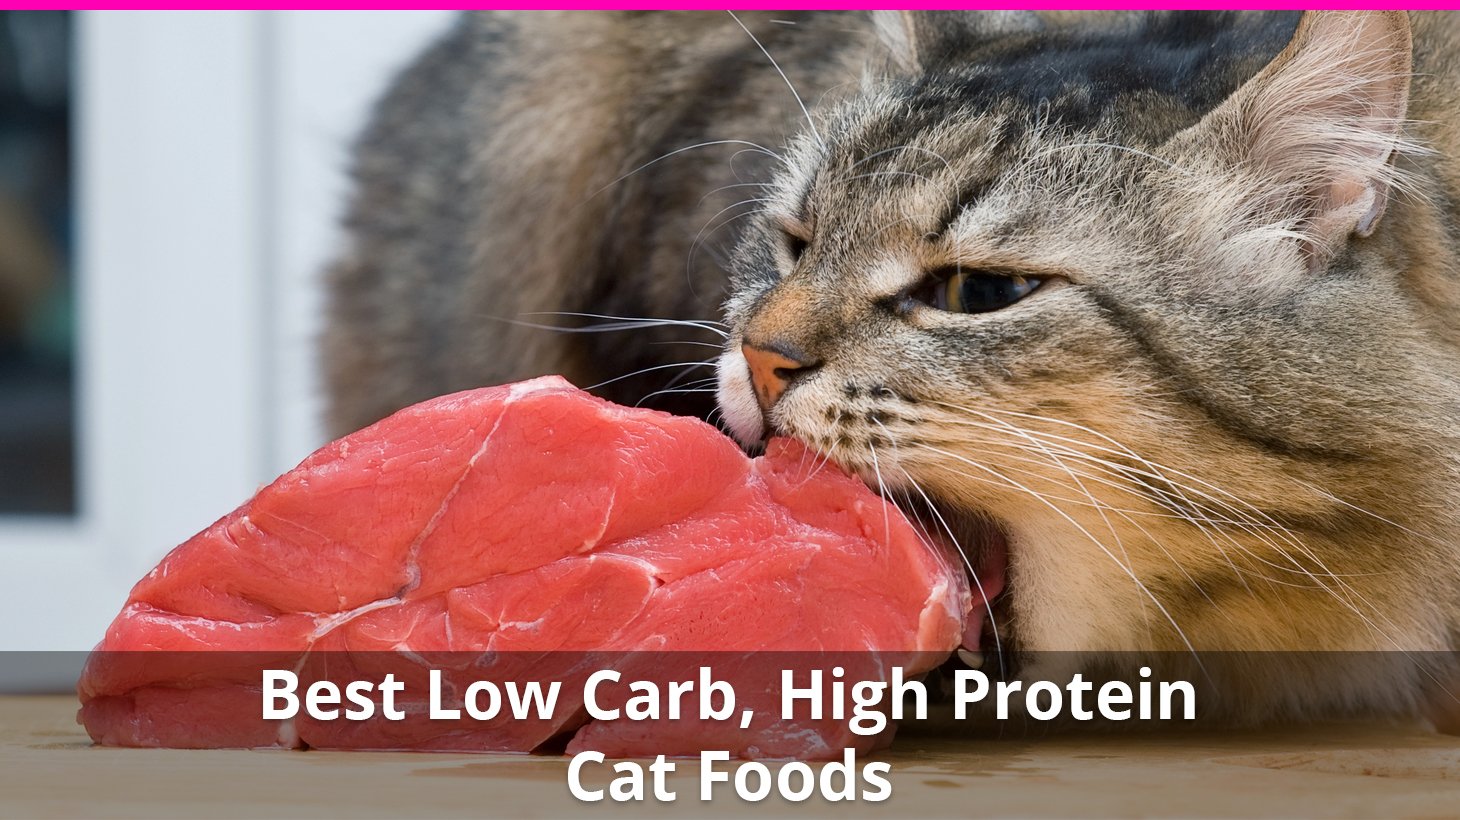 The Best High Protein, Low Carb Cat Food Reviews for 2020